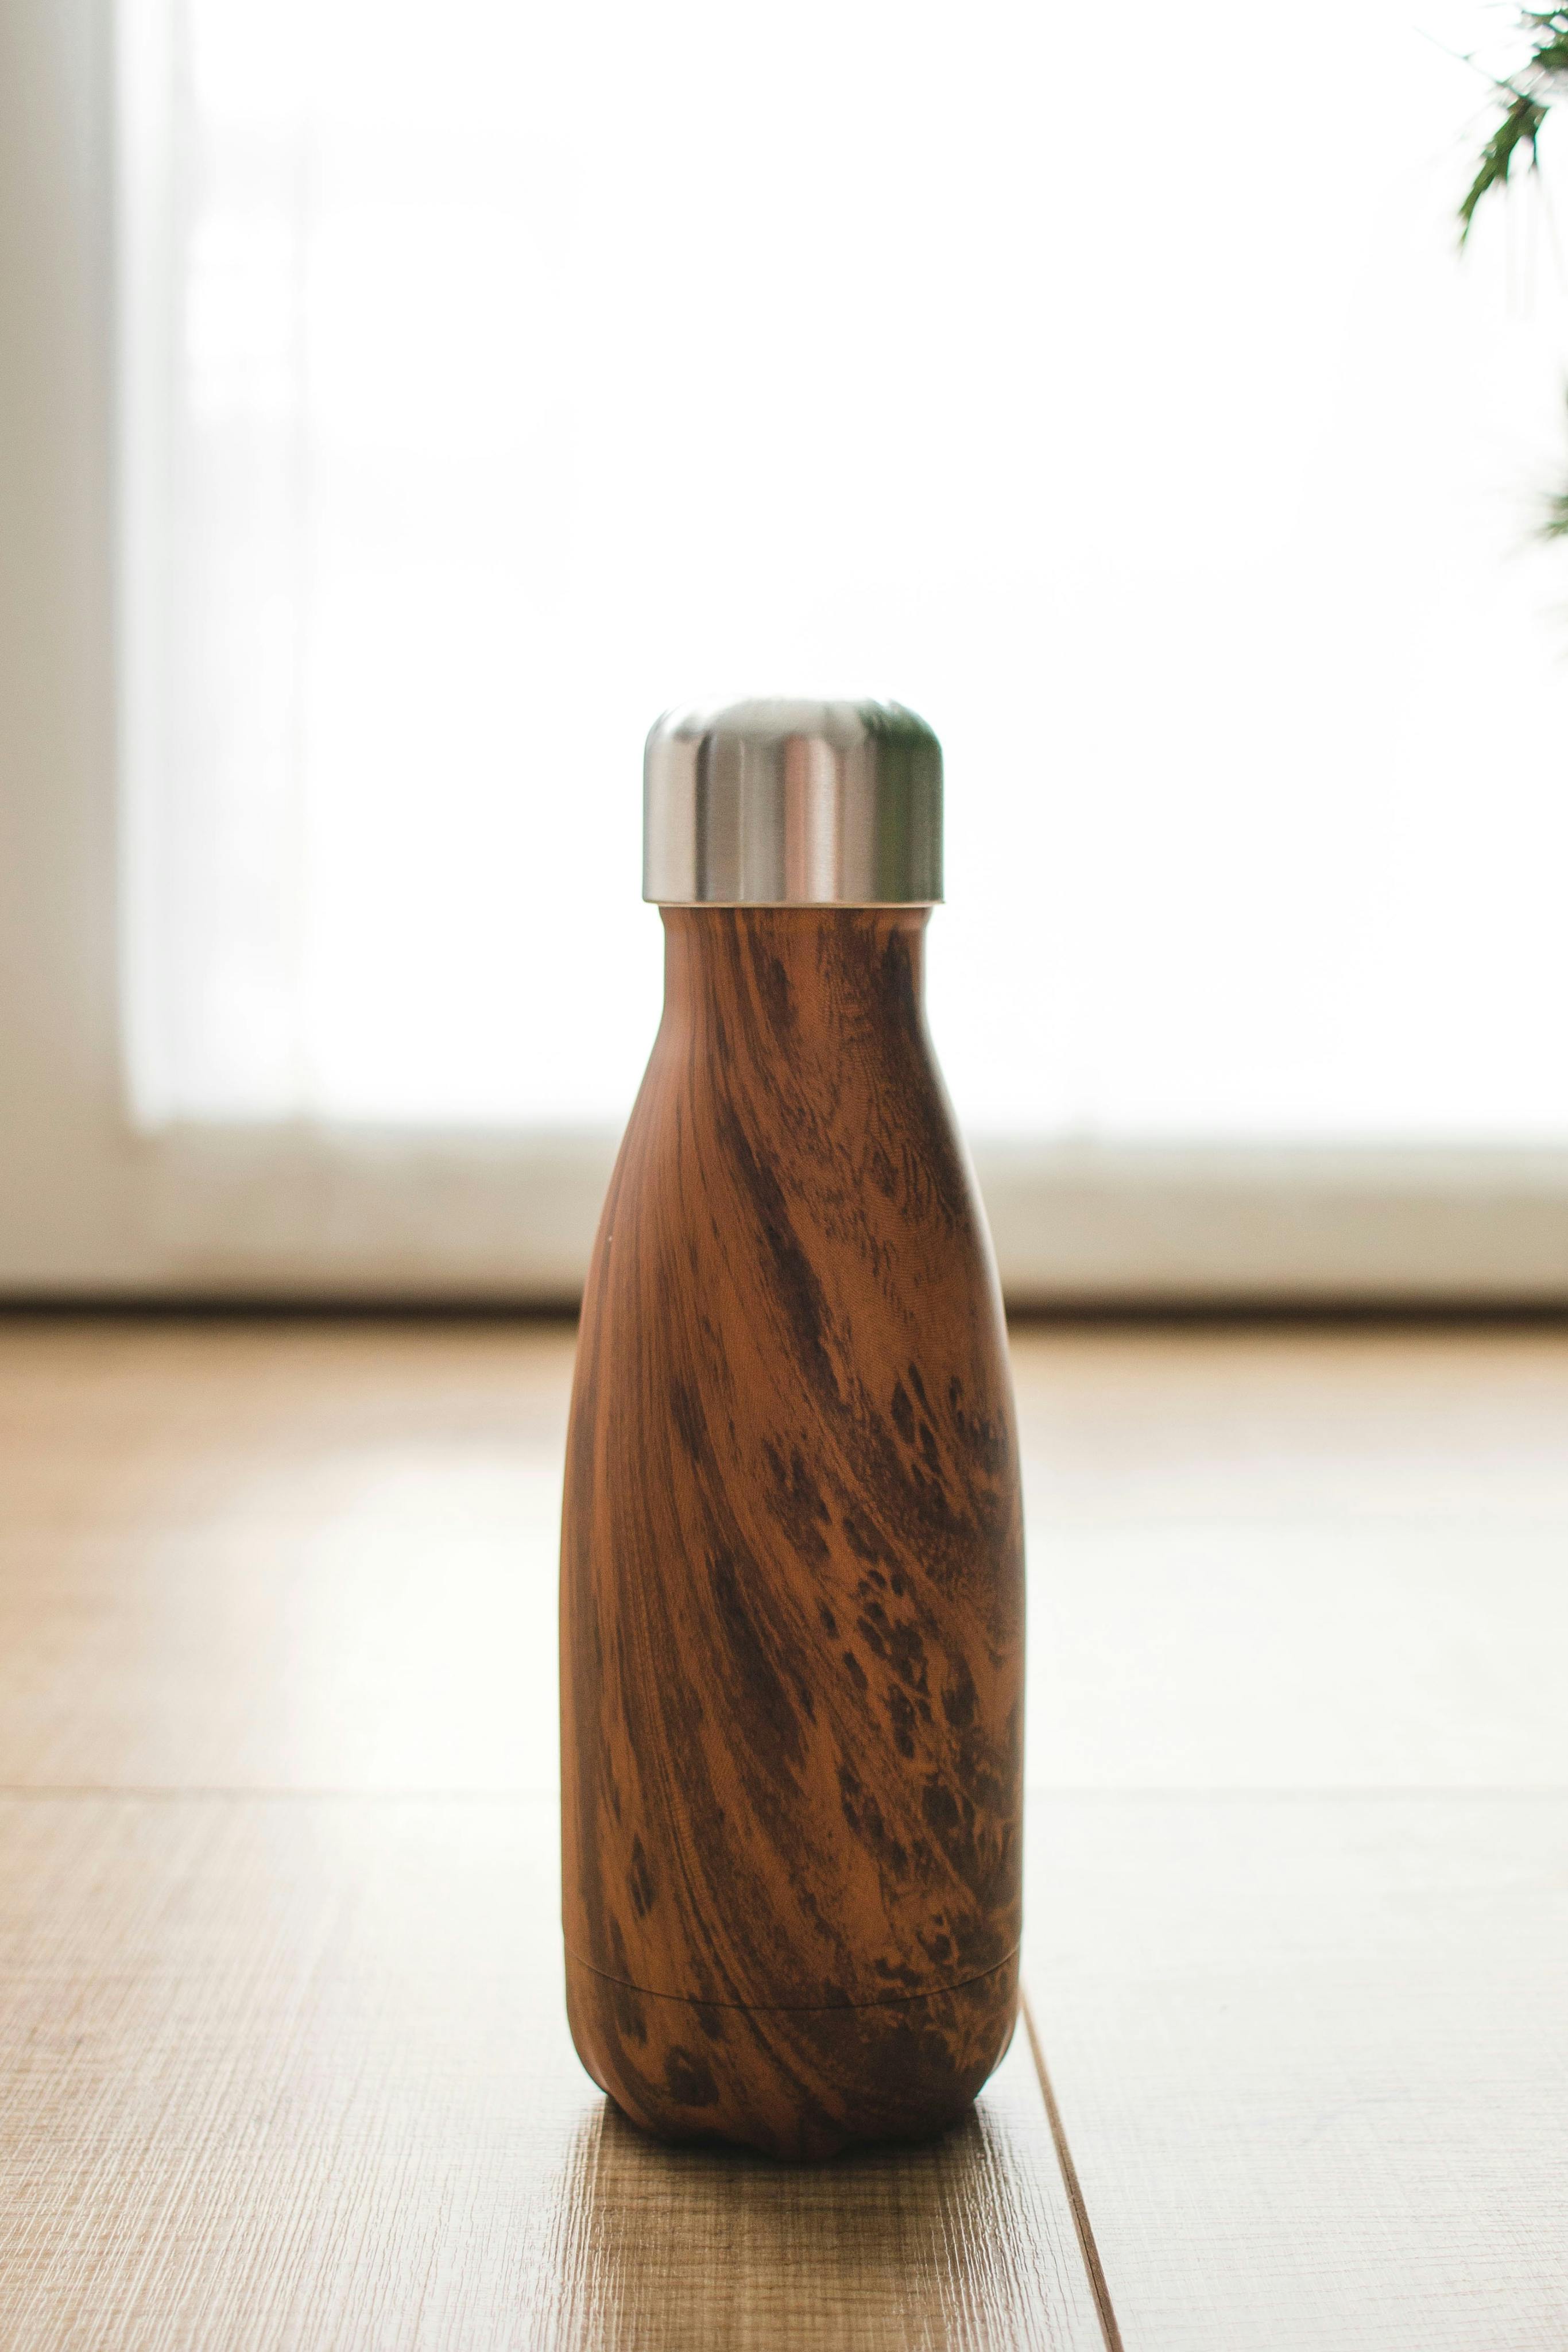 Photograph depicting a reusable steel water bottle